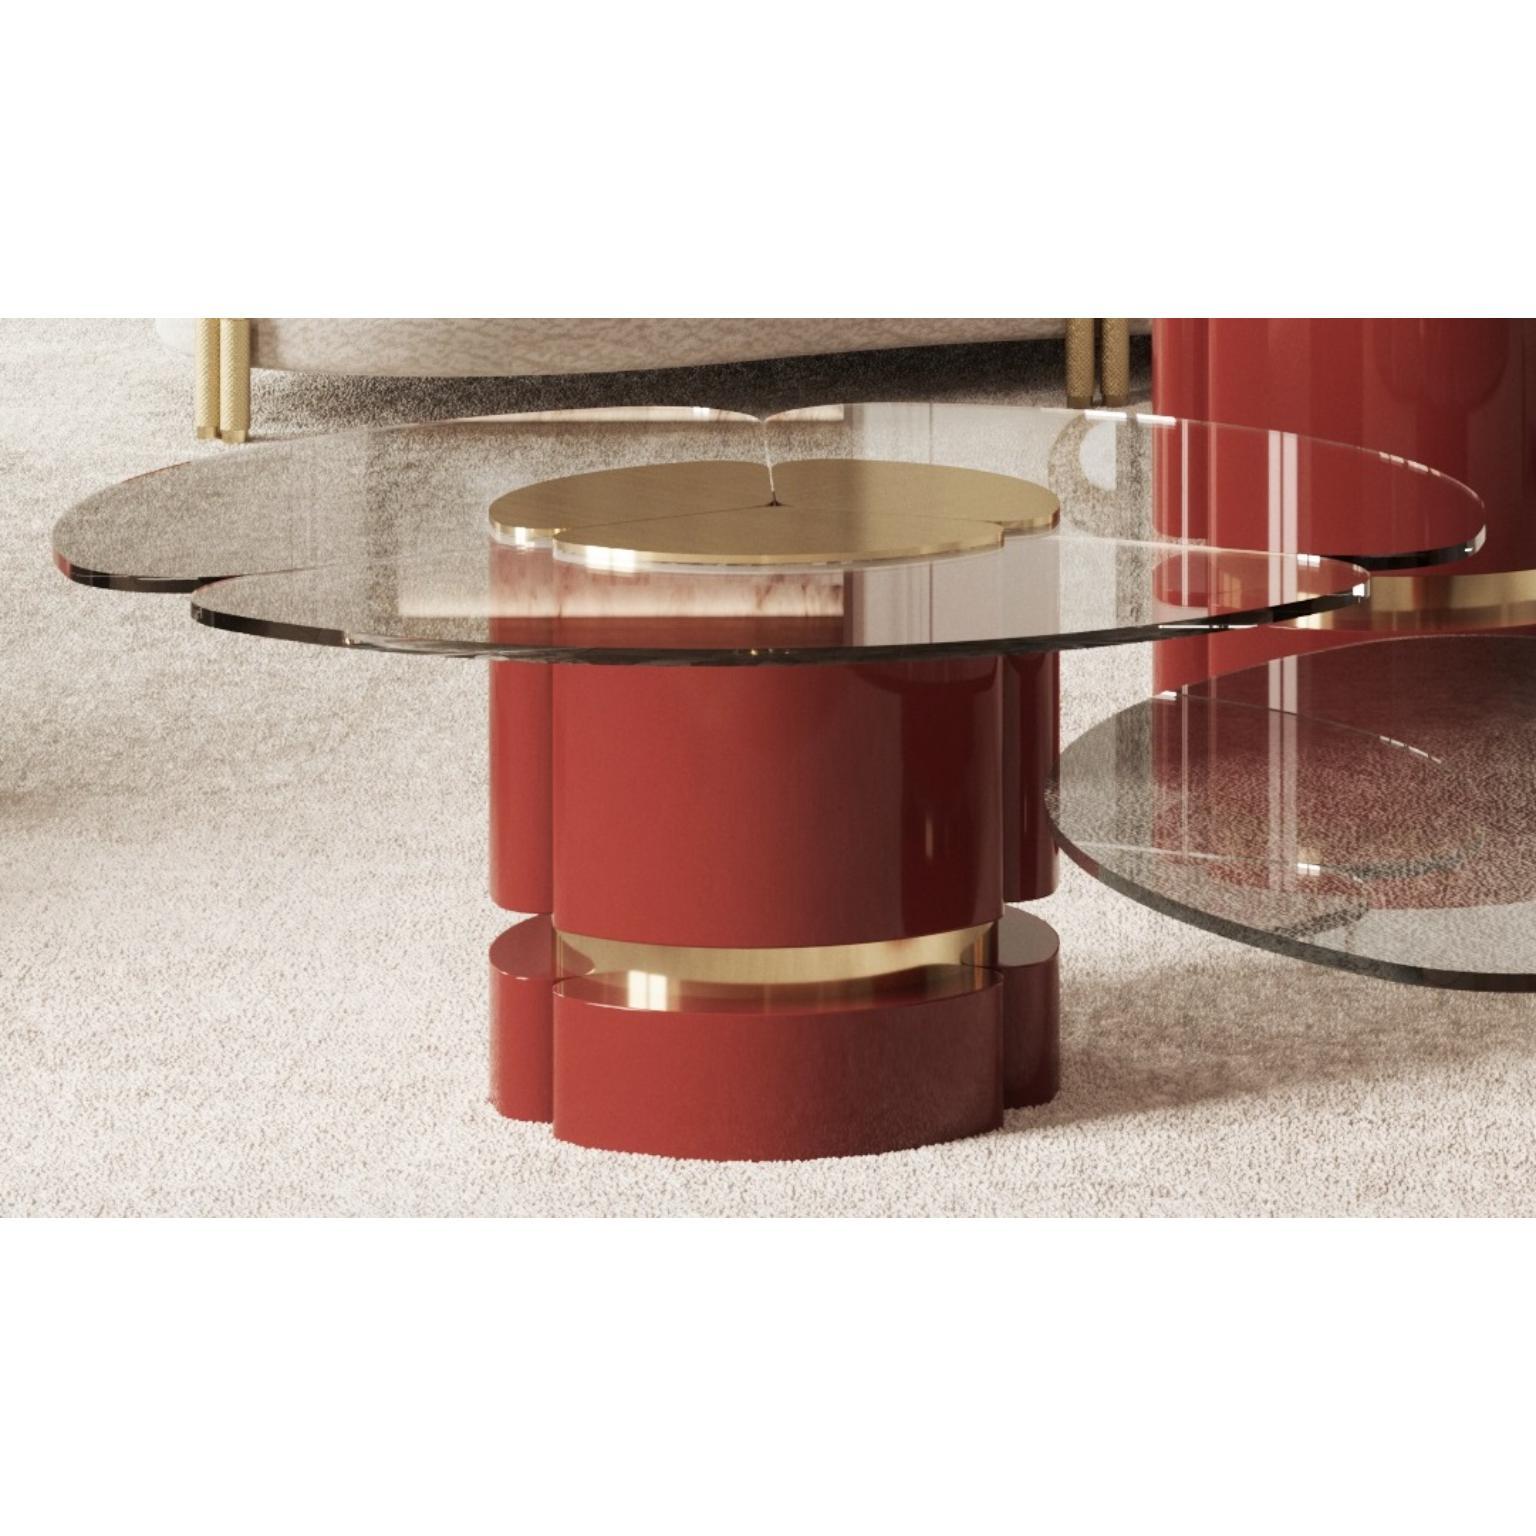 Euphoria Medium Center Table by Memoir Essence
Dimensions: D 90 x W 90 x H 37 cm.
Materials: Polished brass, lacquer and glass.

Available in different sizes. Please contact us.

Memoir presents the new center table set Euphoria. Dynamic, and